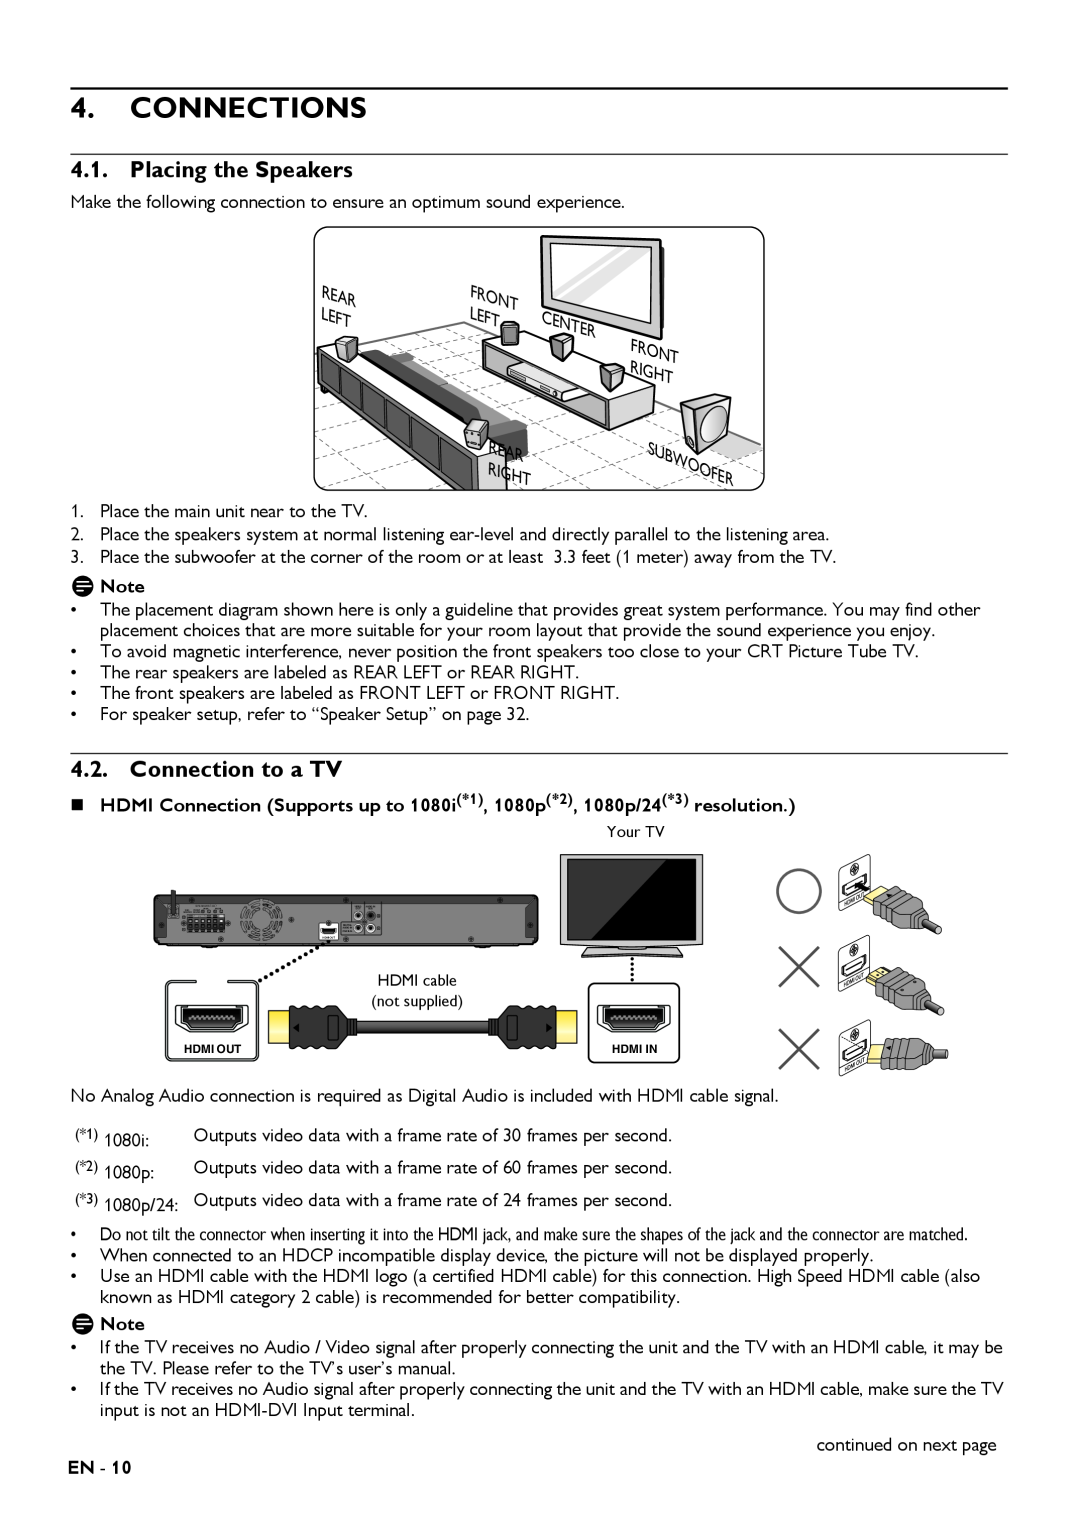 Magnavox MRD430B owner manual Connections, Placing the Speakers, Connection to a TV, Subwoofer 